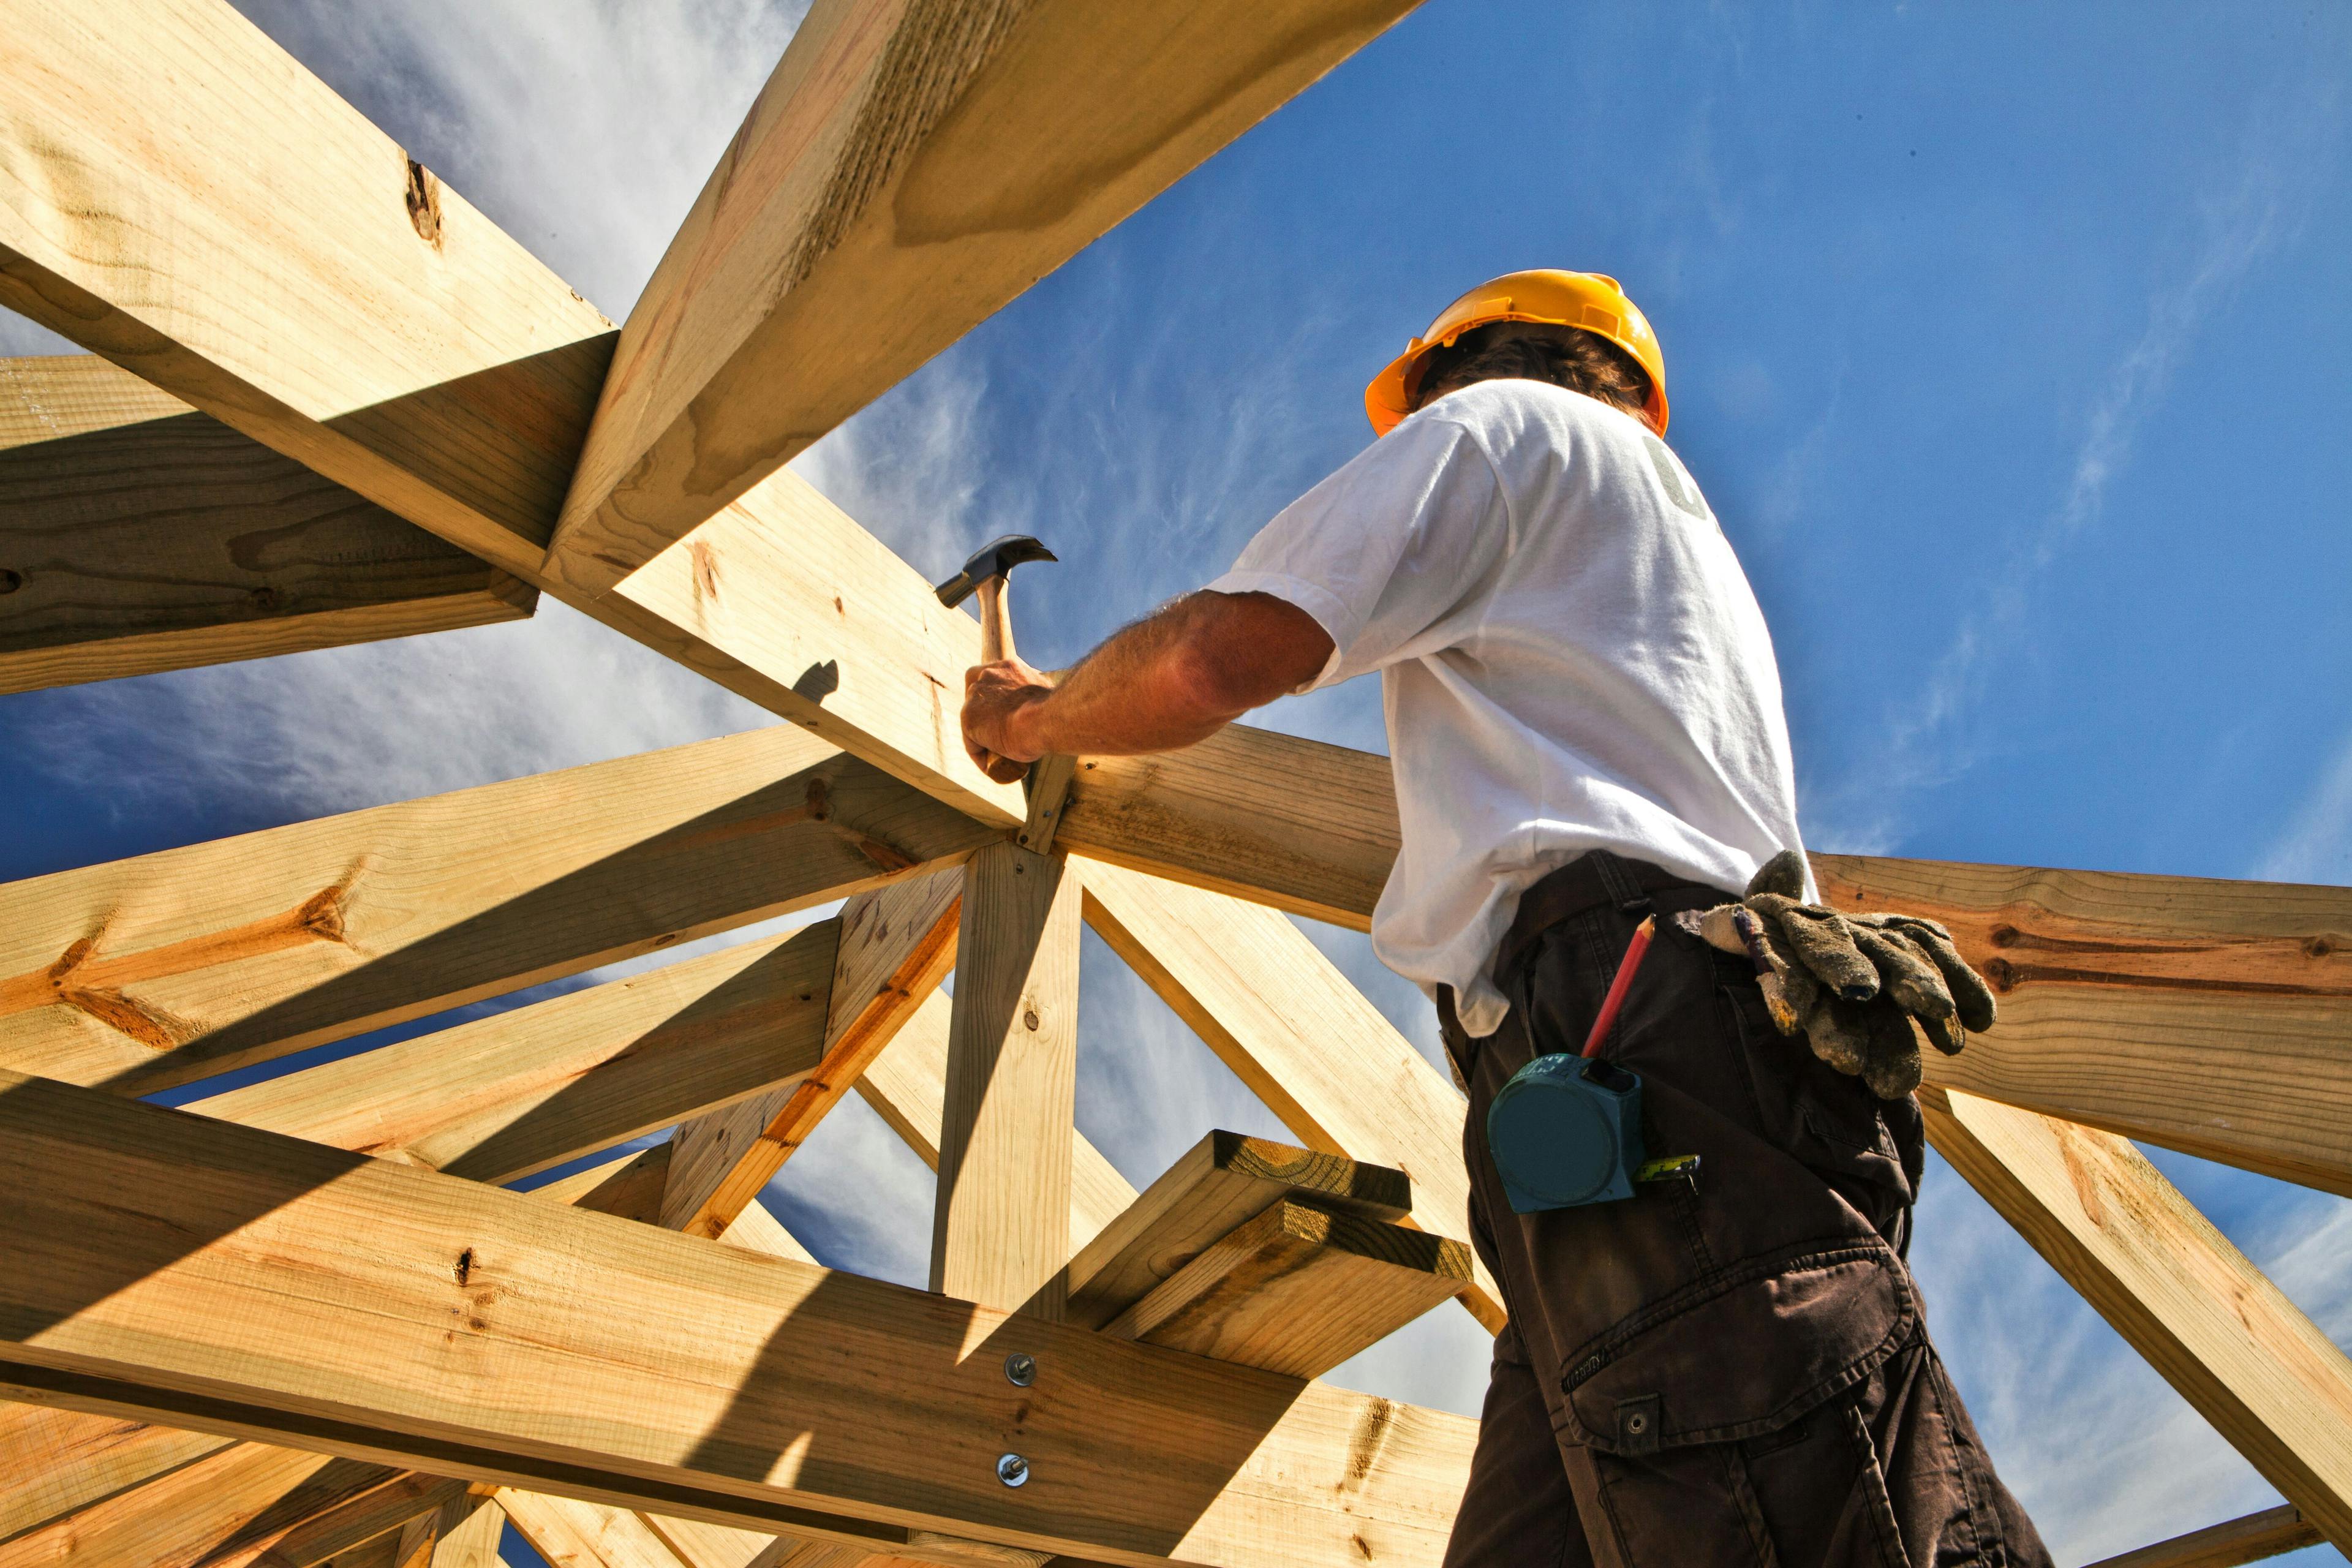 How to Ensure Outdoor Workers Use Sun Protection